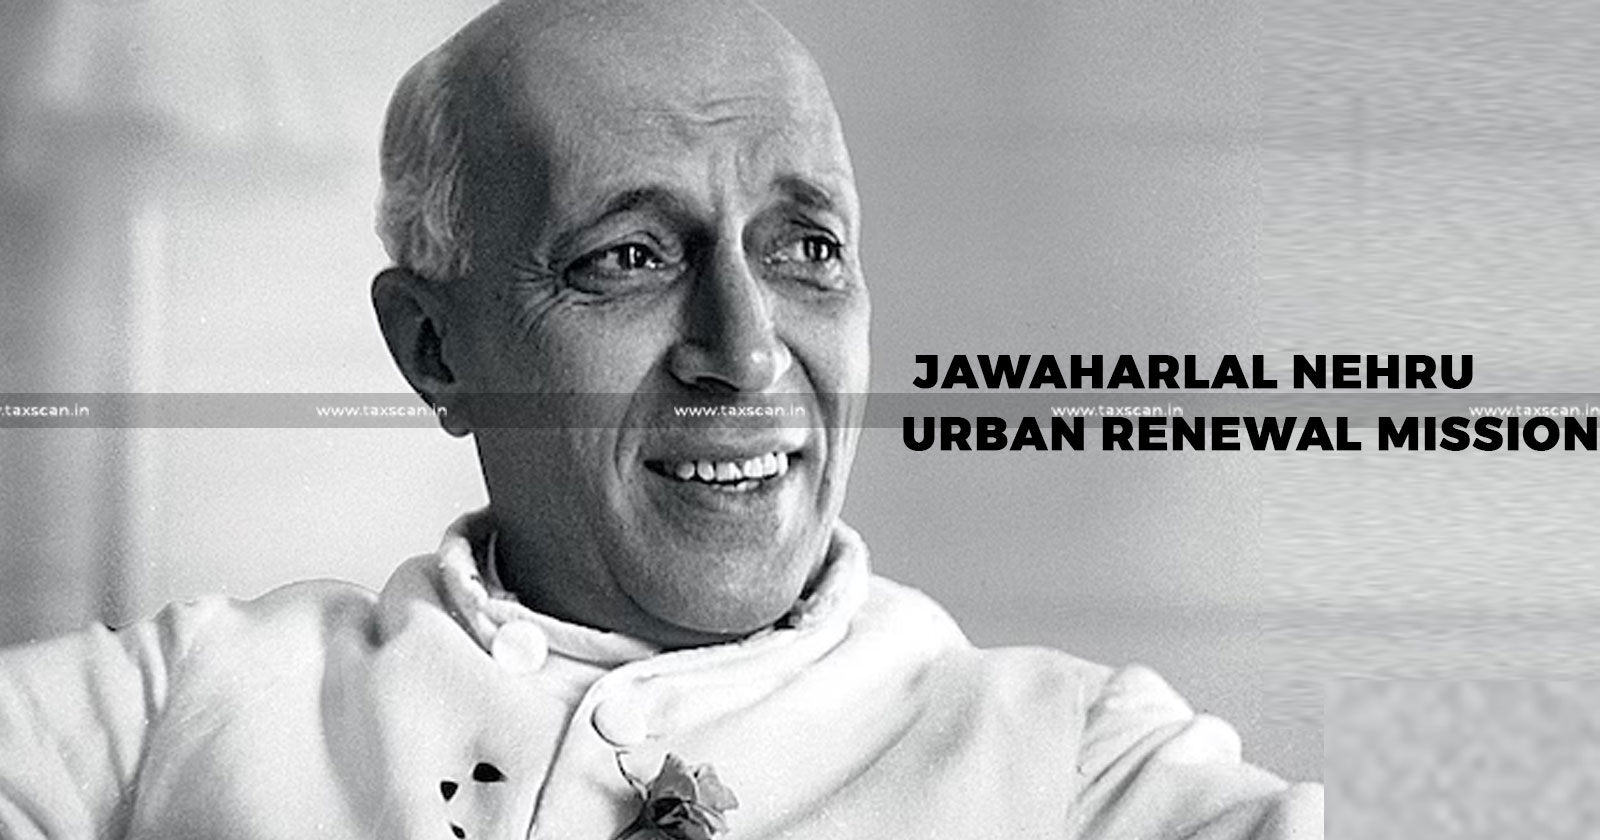 No service Tax - Leviable - Construction Service - Residential Complex - JawaharLal Nehru - Urban Renewal Mission - CESTAT - taxscan